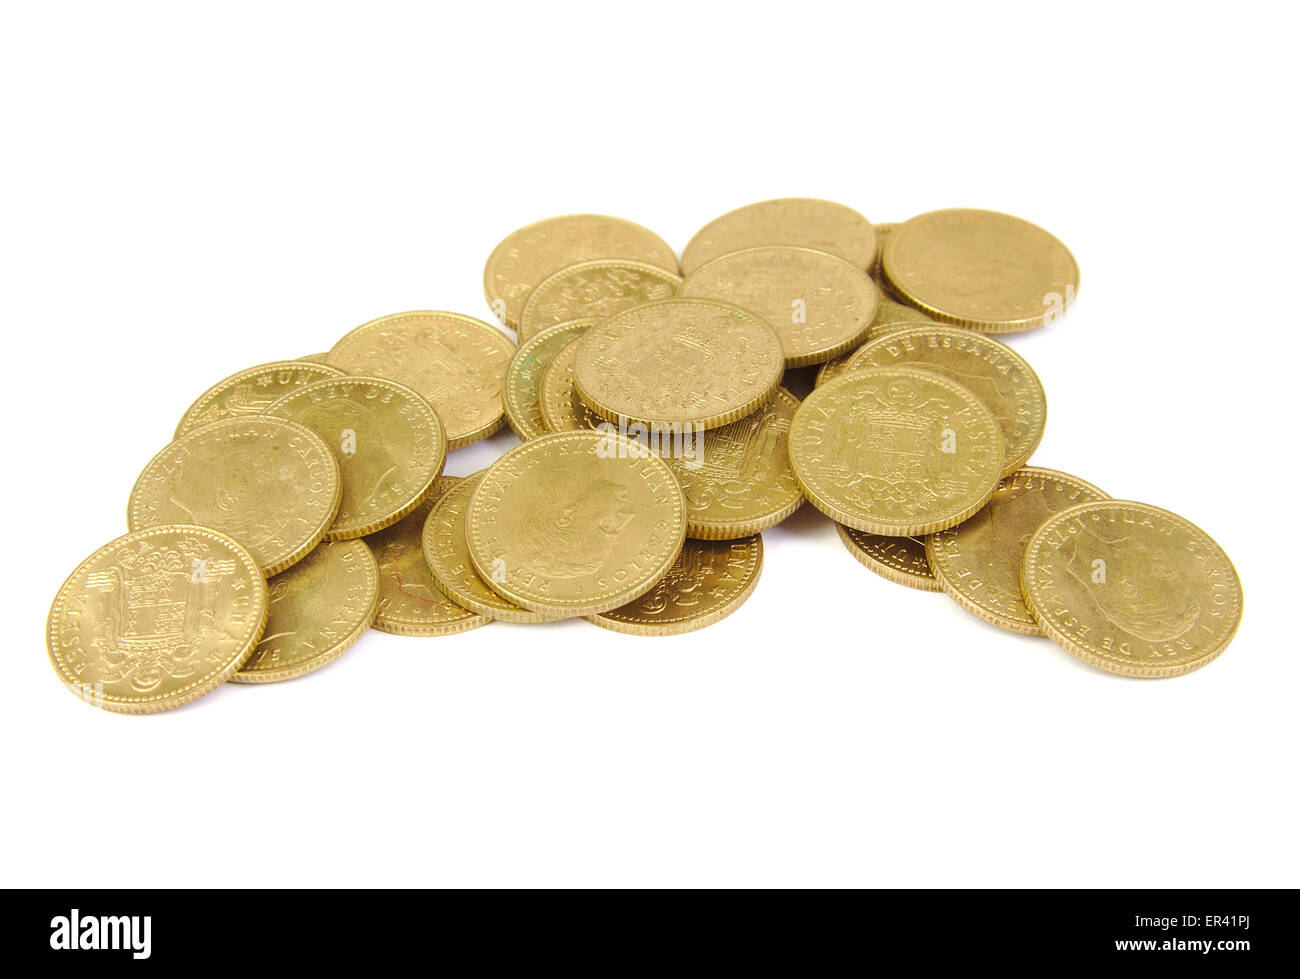 Bunch of old Spanish coins on white background. One peseta. Stock Photo